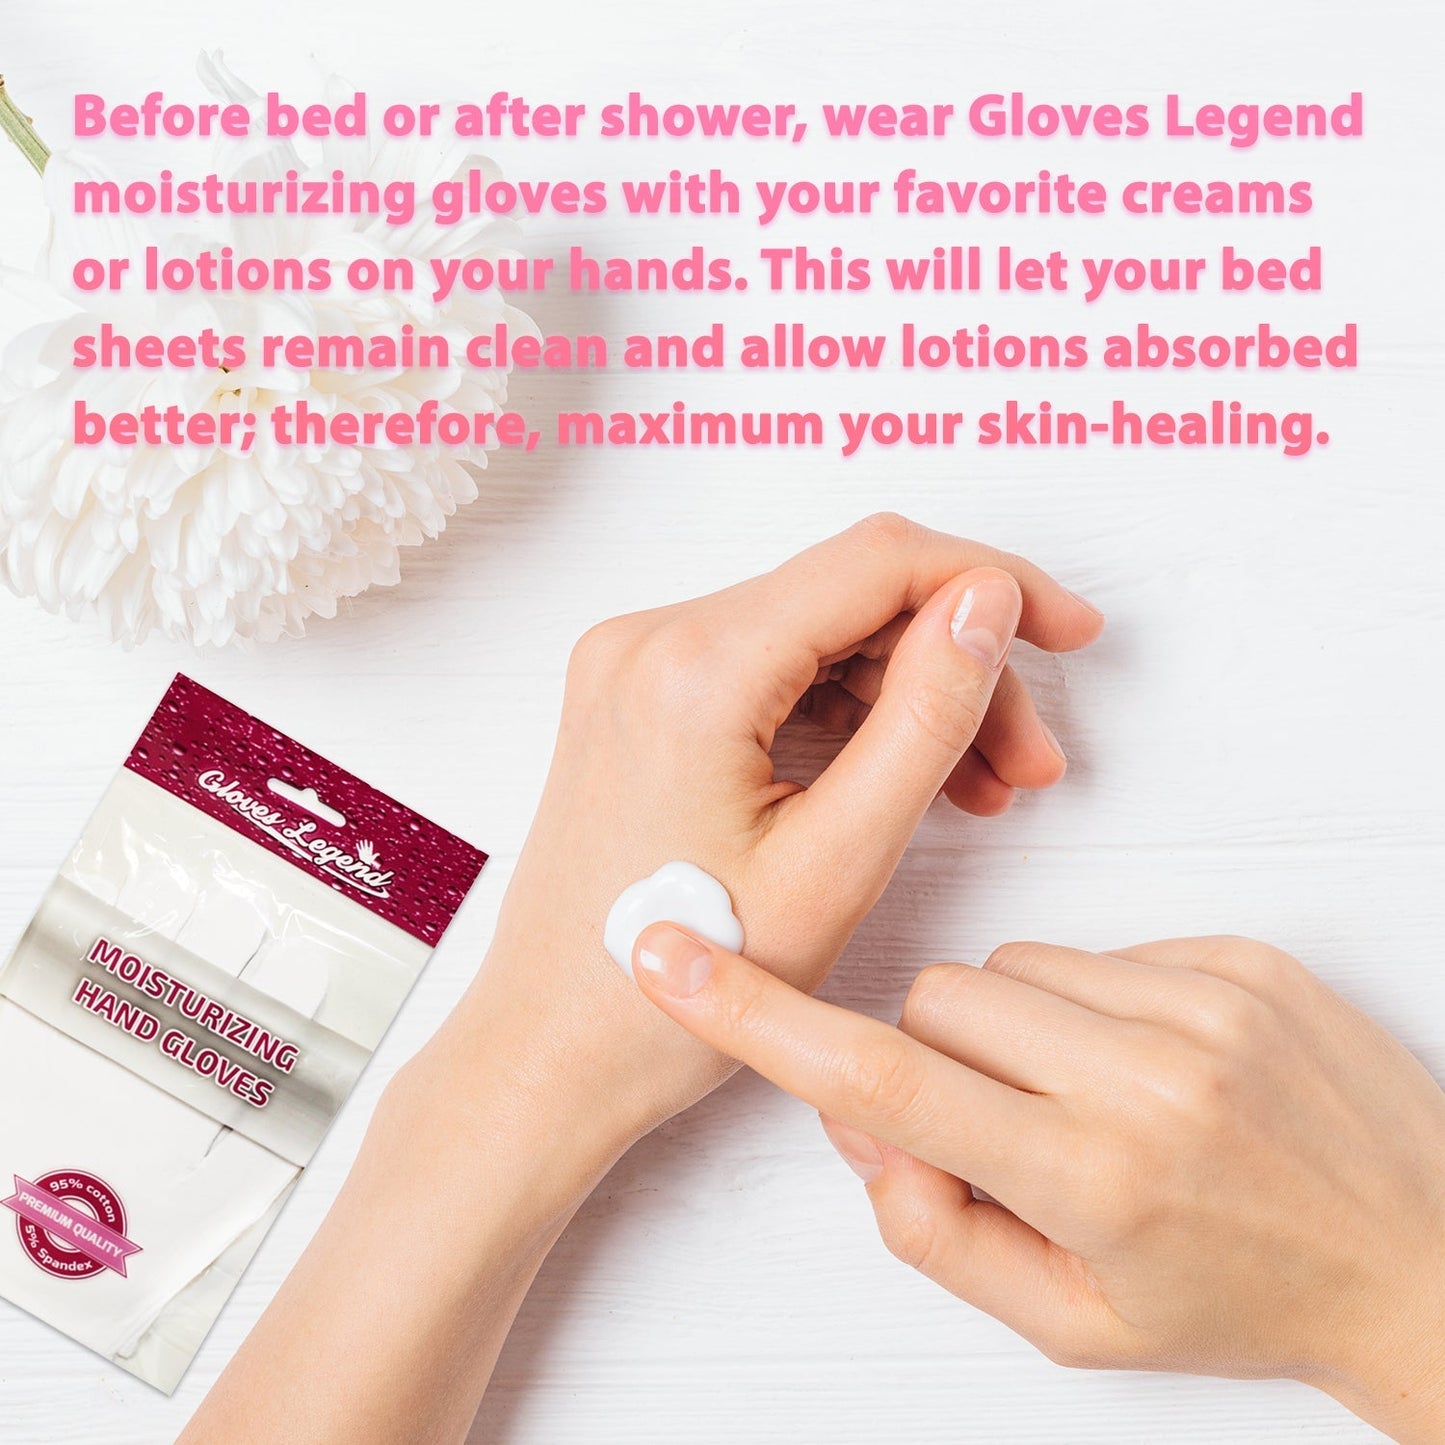 Gloves Legend White Cotton Overnight Moisturizing Spa Cosmetic Gloves for Eczema Sensitive Irritated Dry Hands - 6 Pairs (12 Gloves)